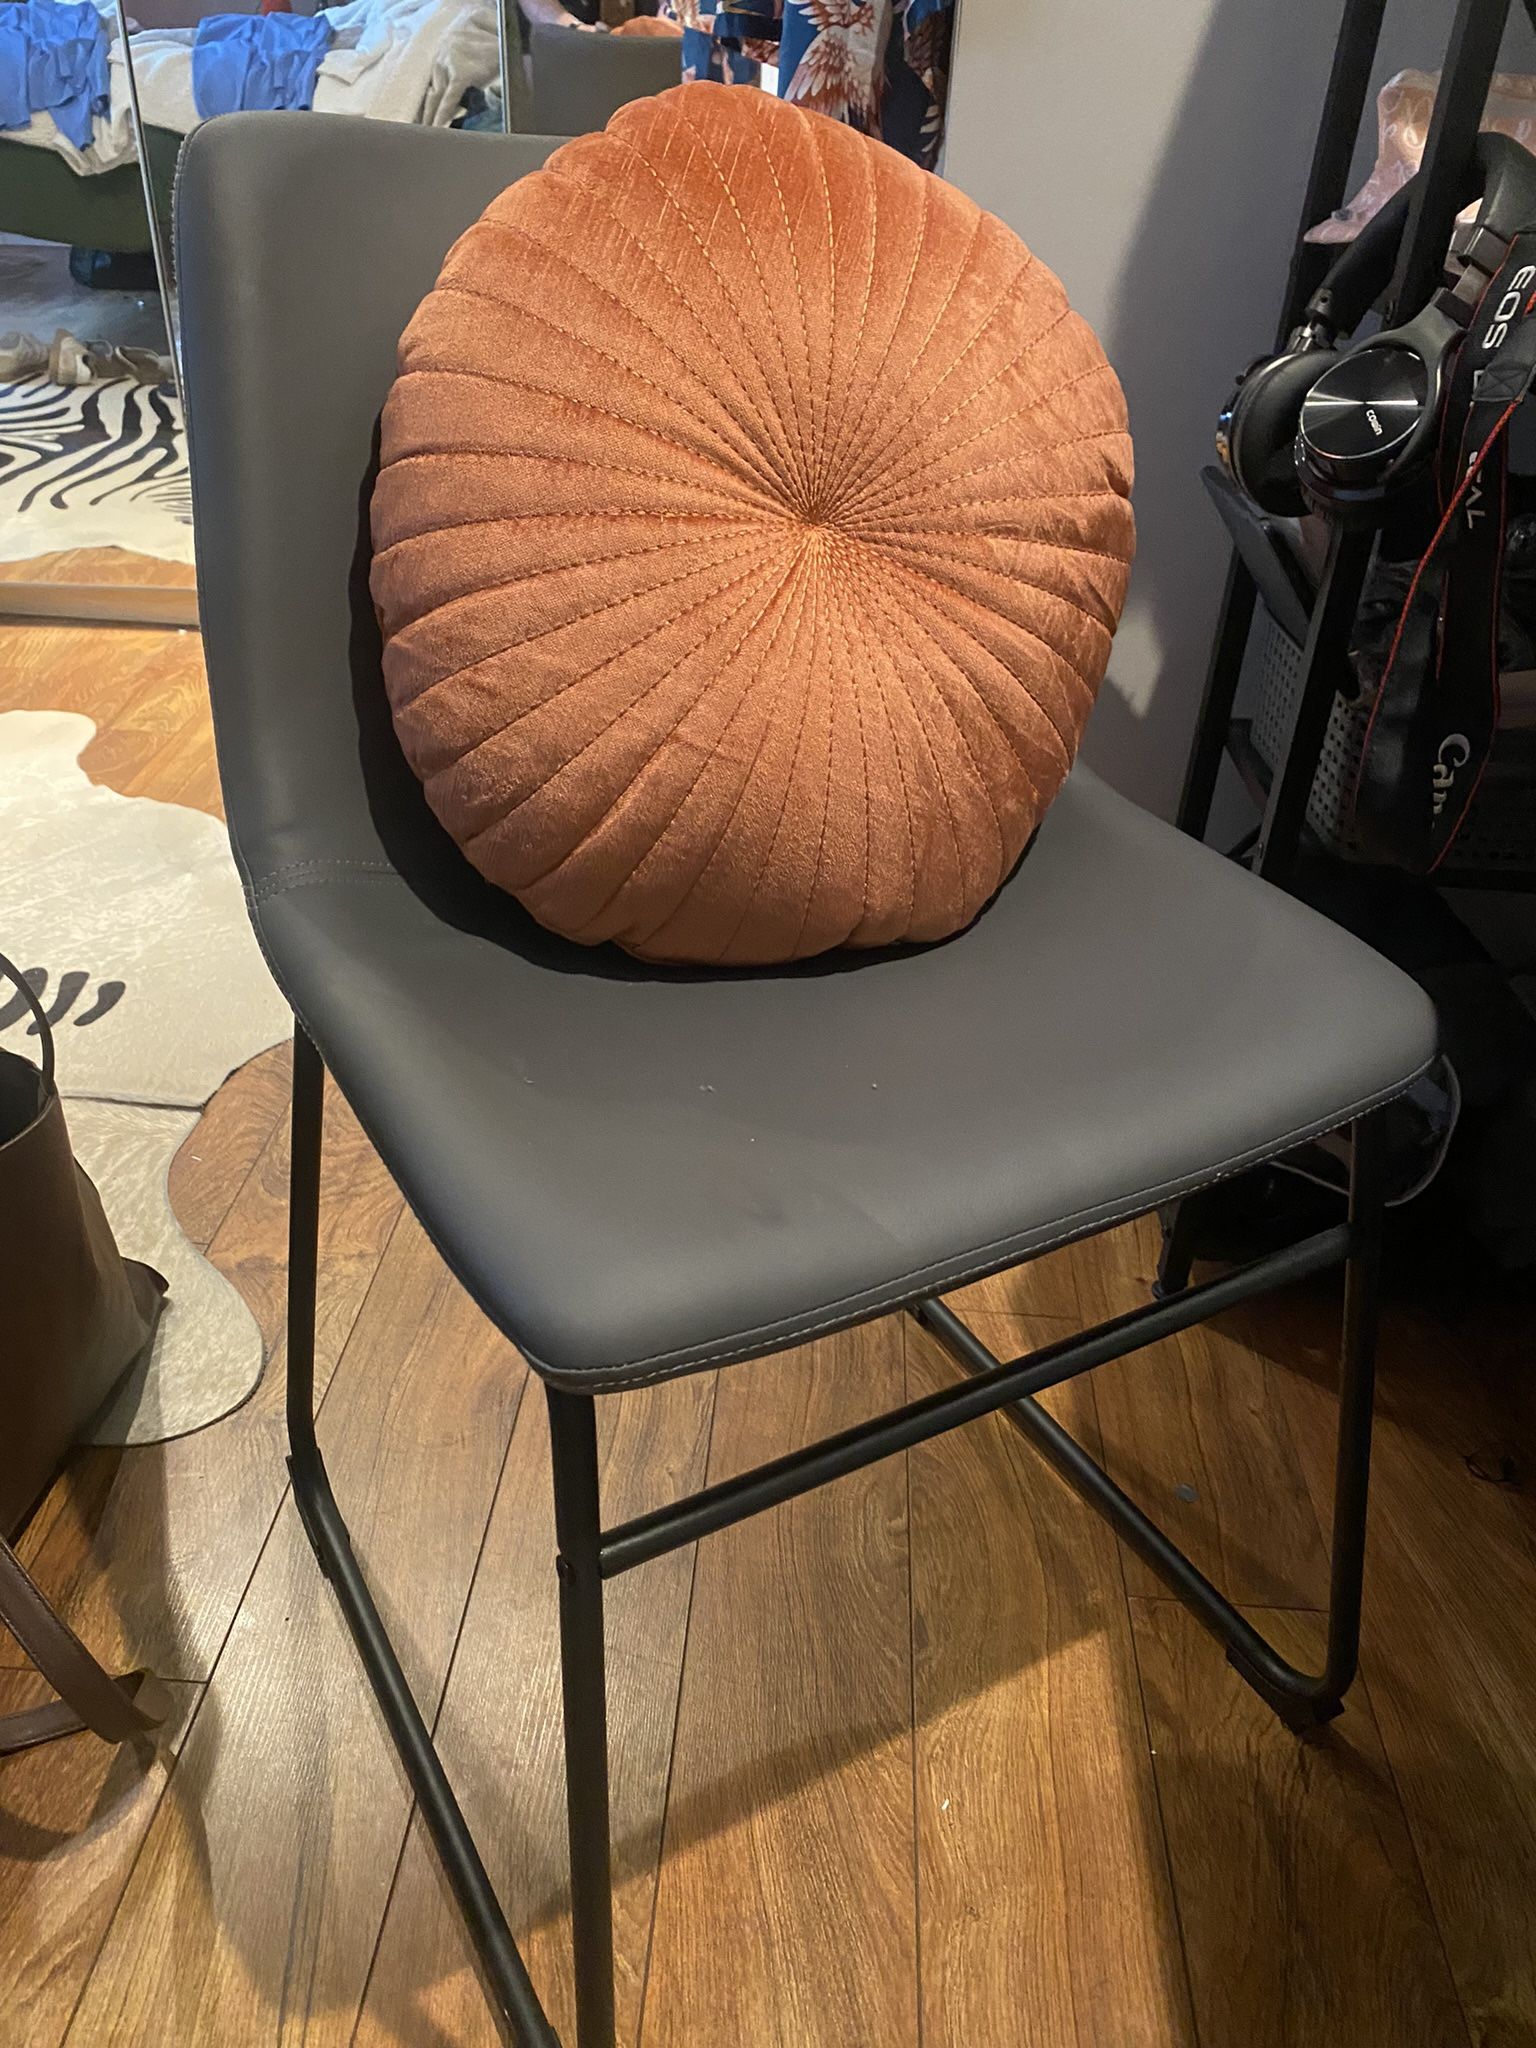 Supported Desk Chair